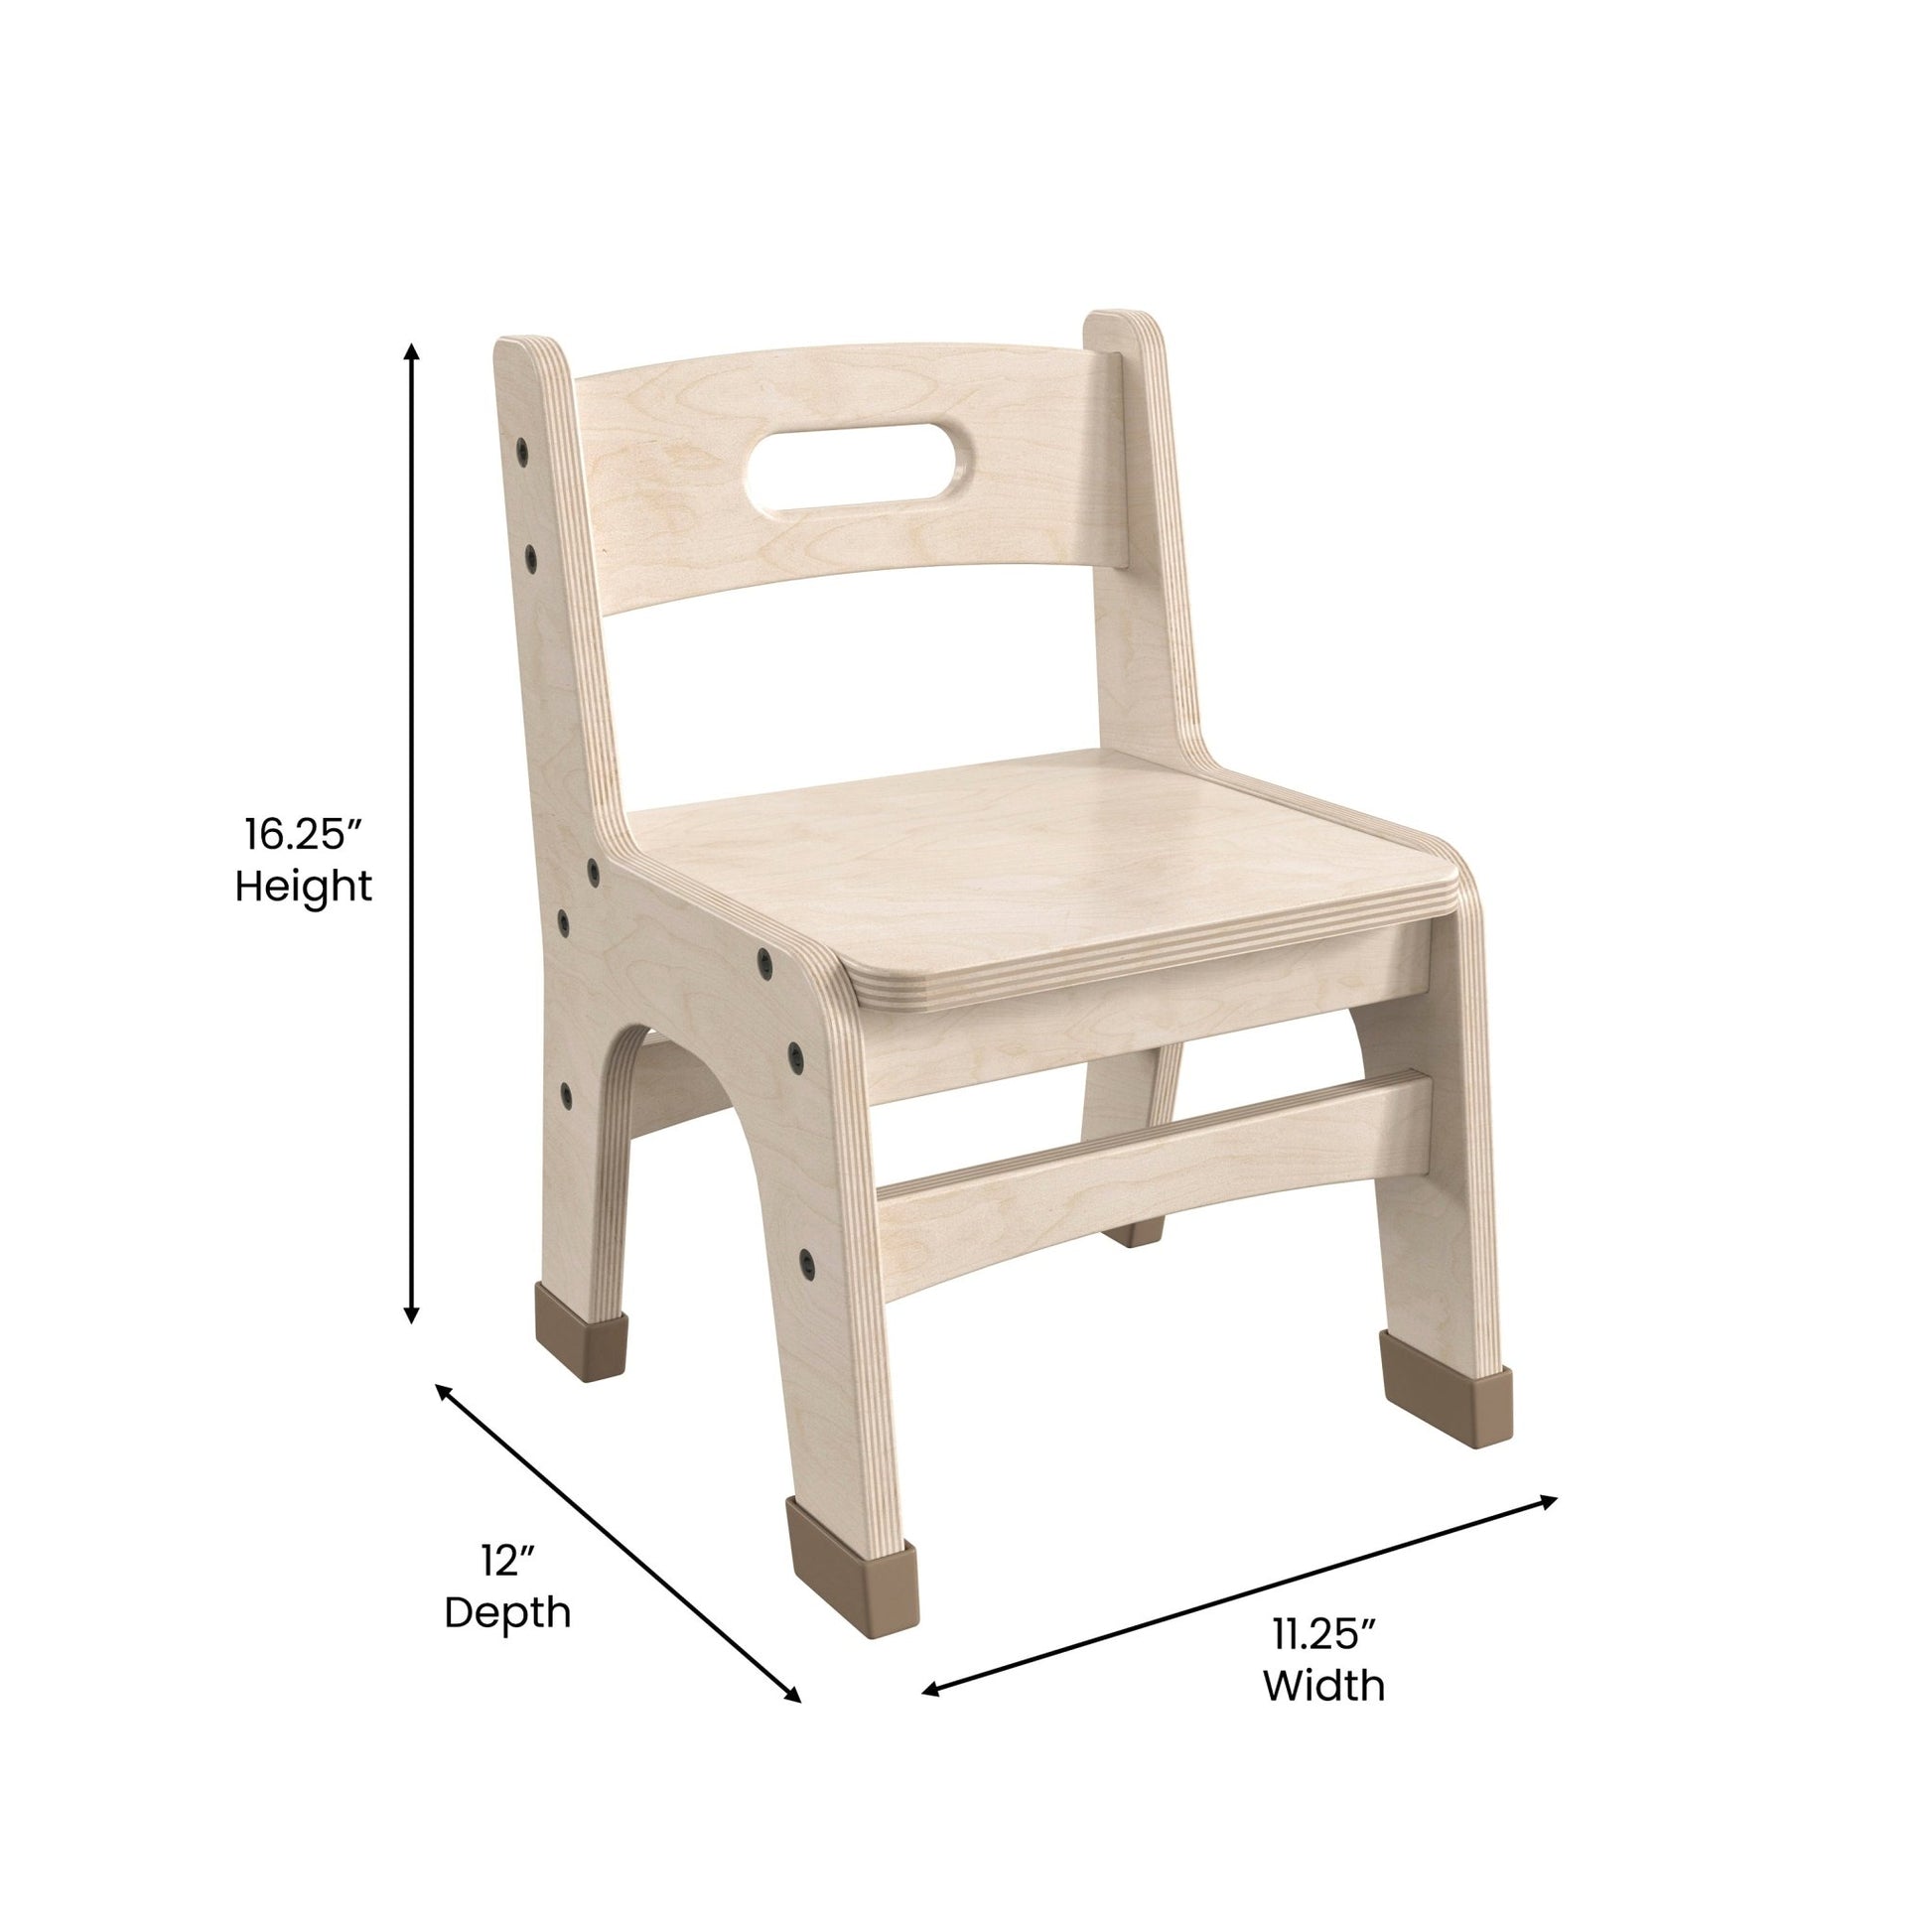 Bright Beginnings Set of 2 Commercial Grade Wooden Classroom Chairs, 9" Seat Height with Non-Slip Foot Caps and Built-In Carrying Handle, Natural - SchoolOutlet